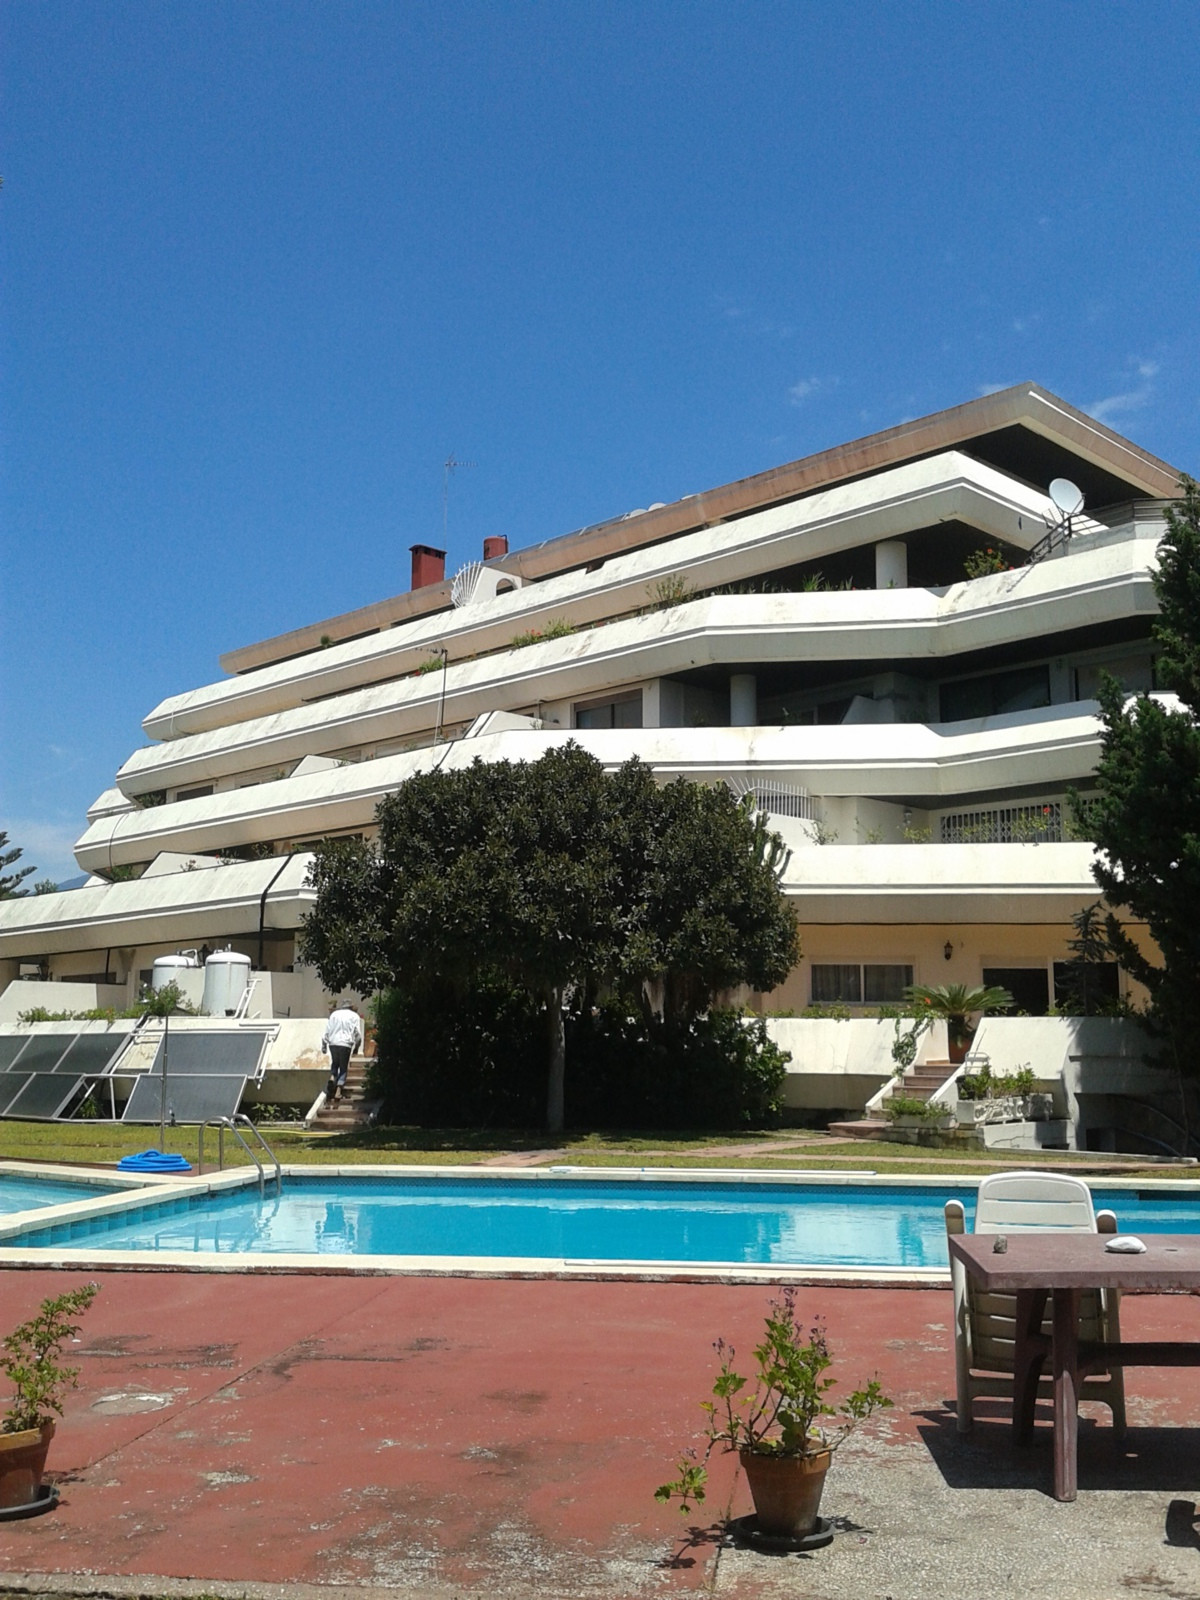 36 bedroom Commercial Property For Sale in Puerto Banús, Málaga - thumb 2